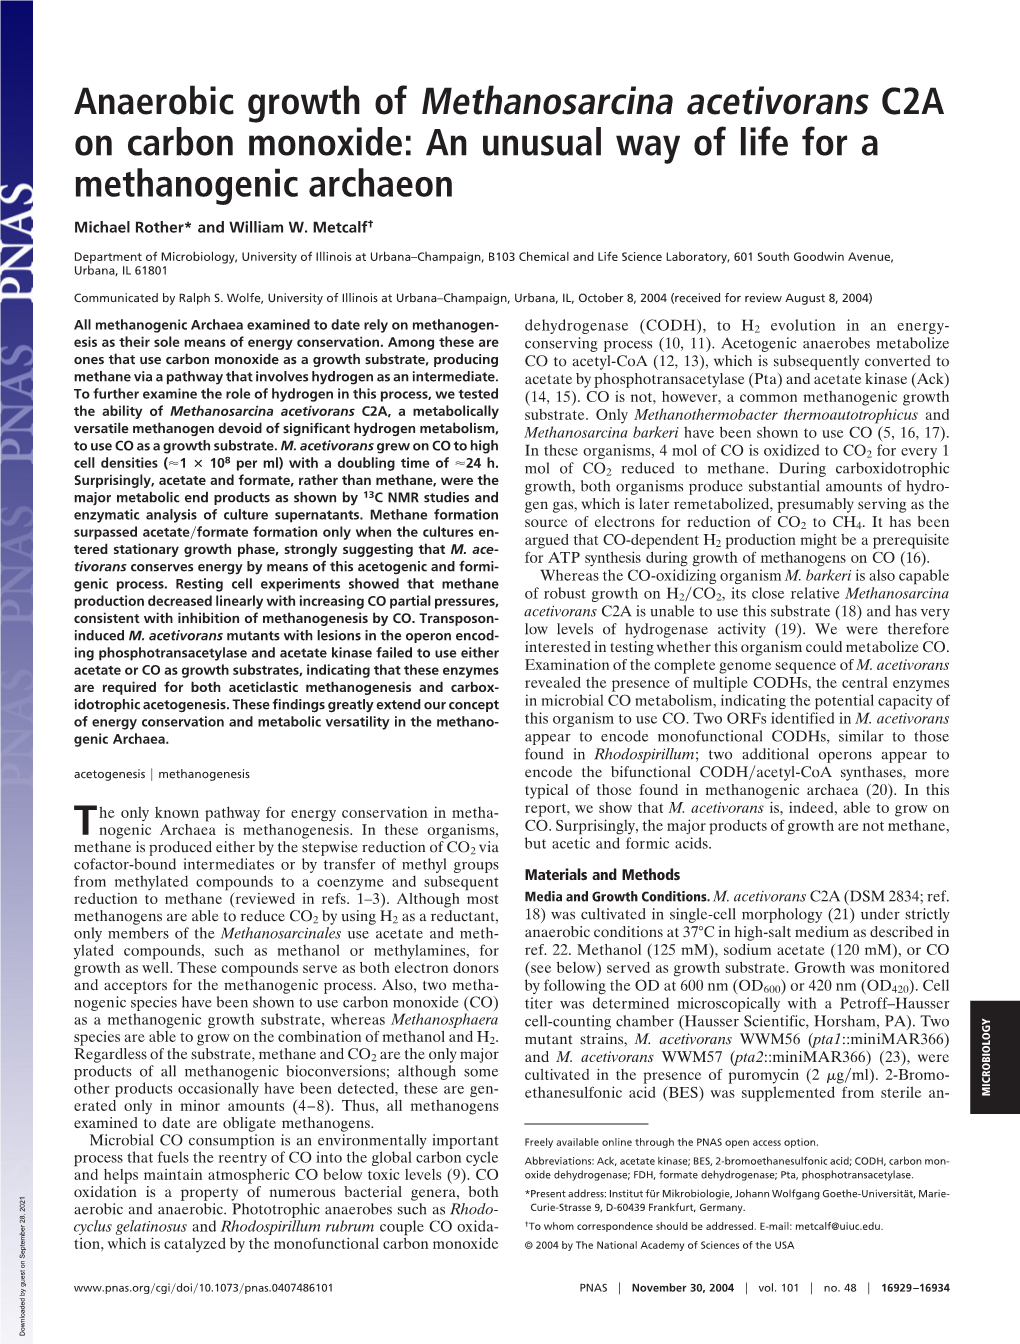 Anaerobic Growth of Methanosarcina Acetivorans C2A on Carbon Monoxide: an Unusual Way of Life for a Methanogenic Archaeon